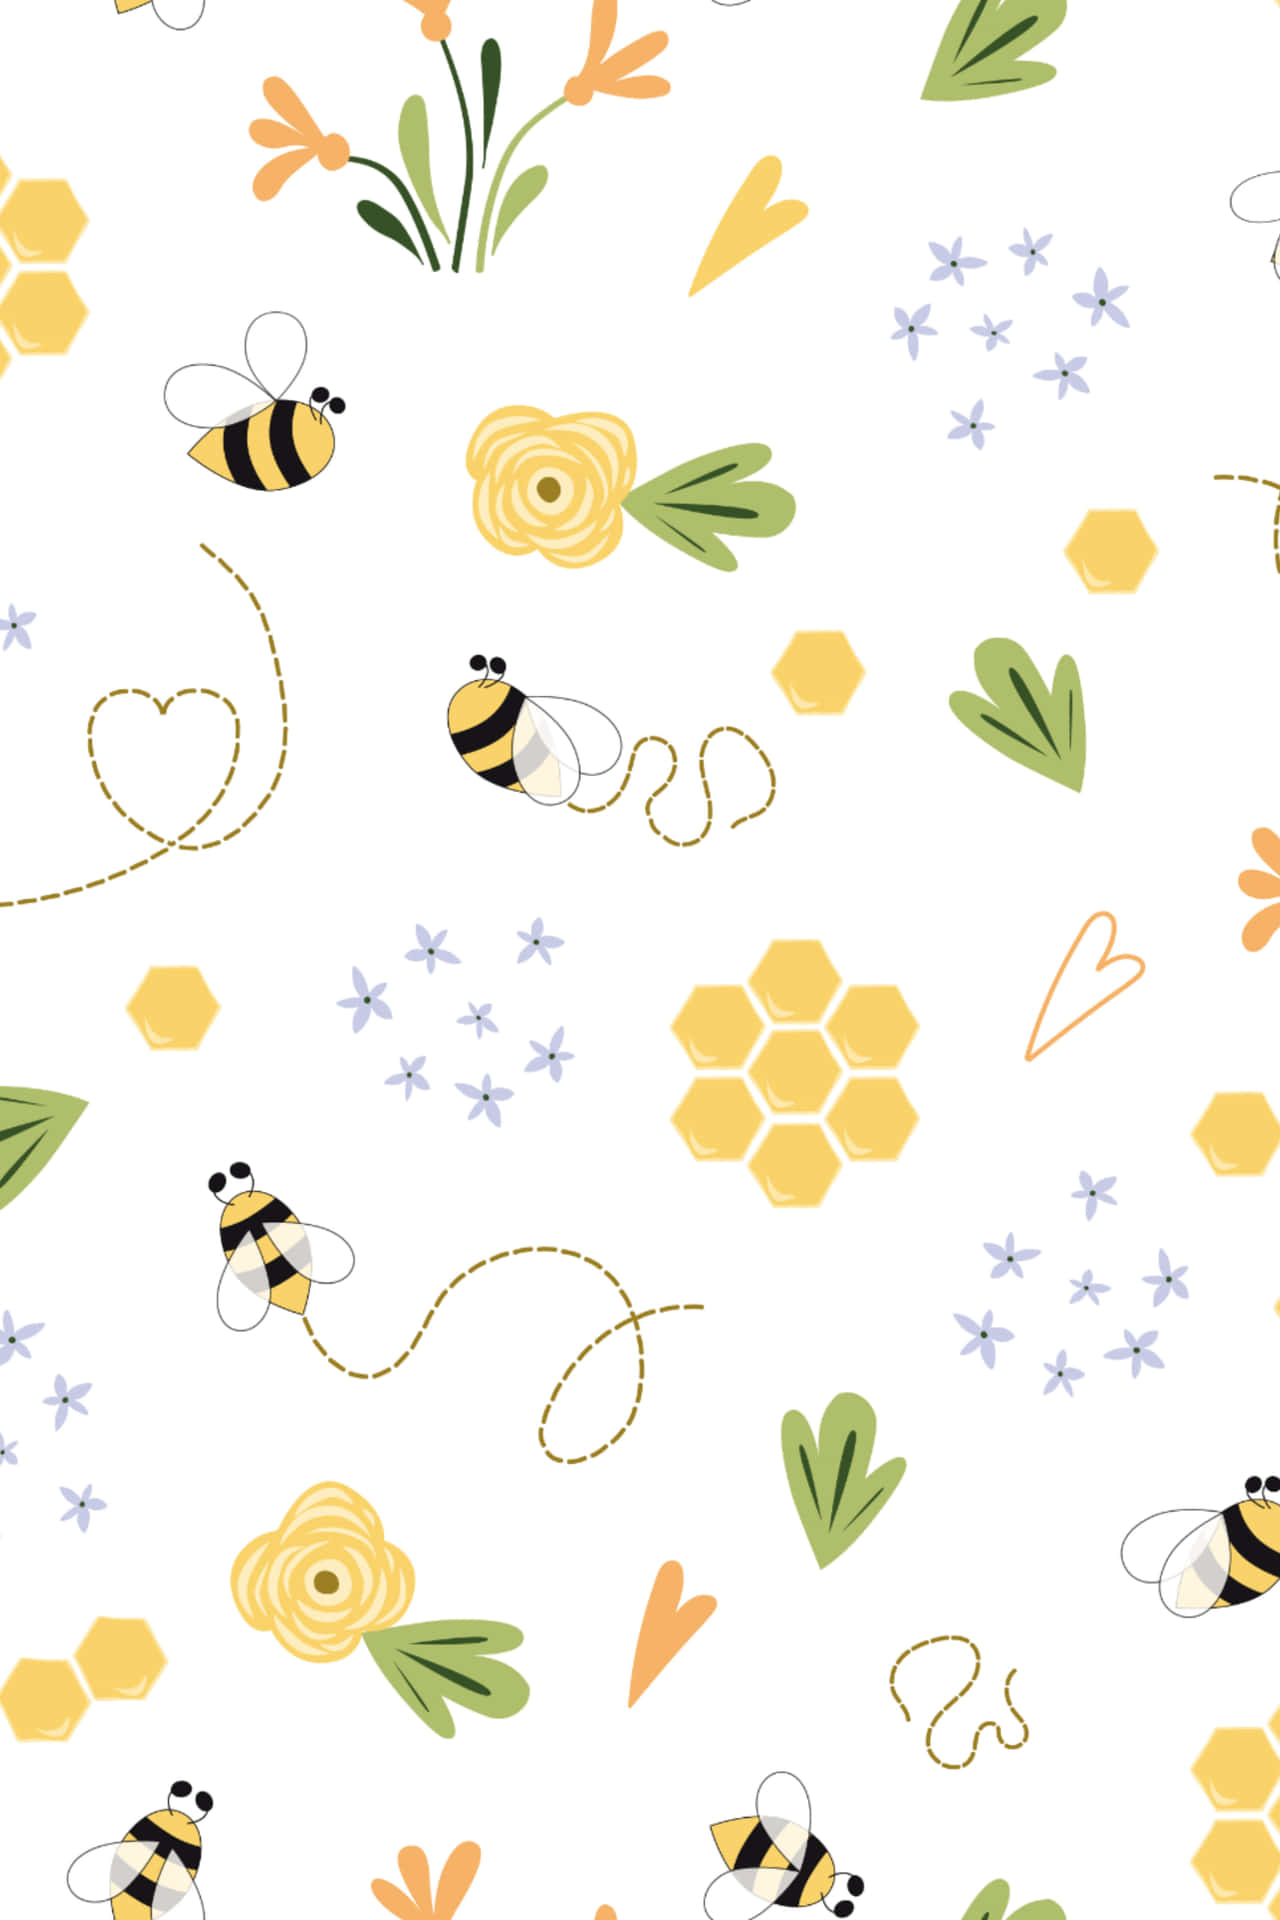 Sweet and delicate vintage bee, perched delicately on a bright yellow flower Wallpaper